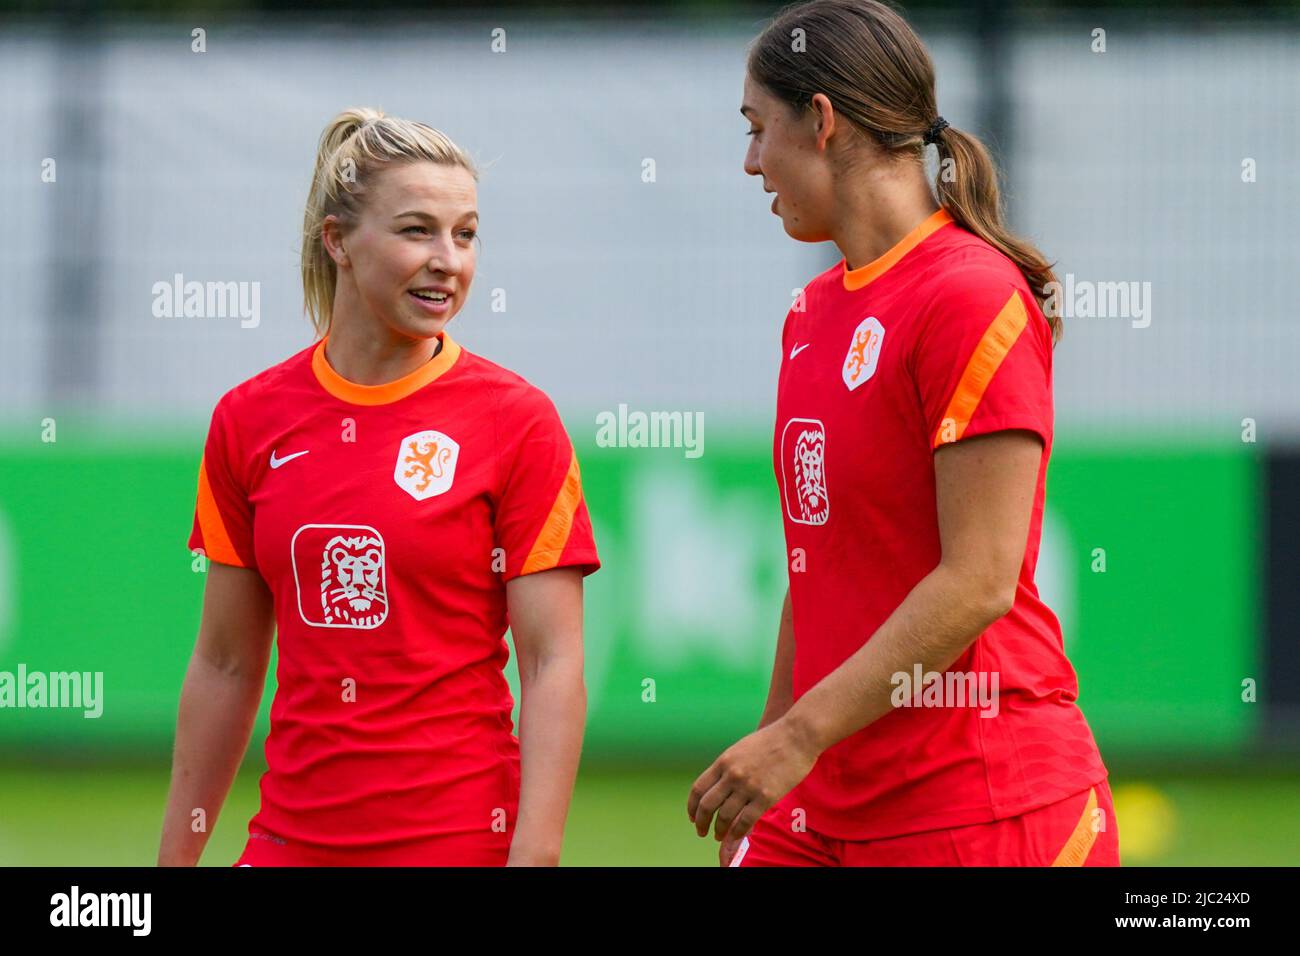 ZEIST, NETHERLANDS - JUNE 9: Jackie Groenen of the Netherlands and Aniek Nouwen of the Netherlands during a Training Session of the Netherlands Women at KNVB Campus on June 9, 2022 in Zeist, Netherlands. (Photo by Joris Verwijst/Orange Pictures) Stock Photo